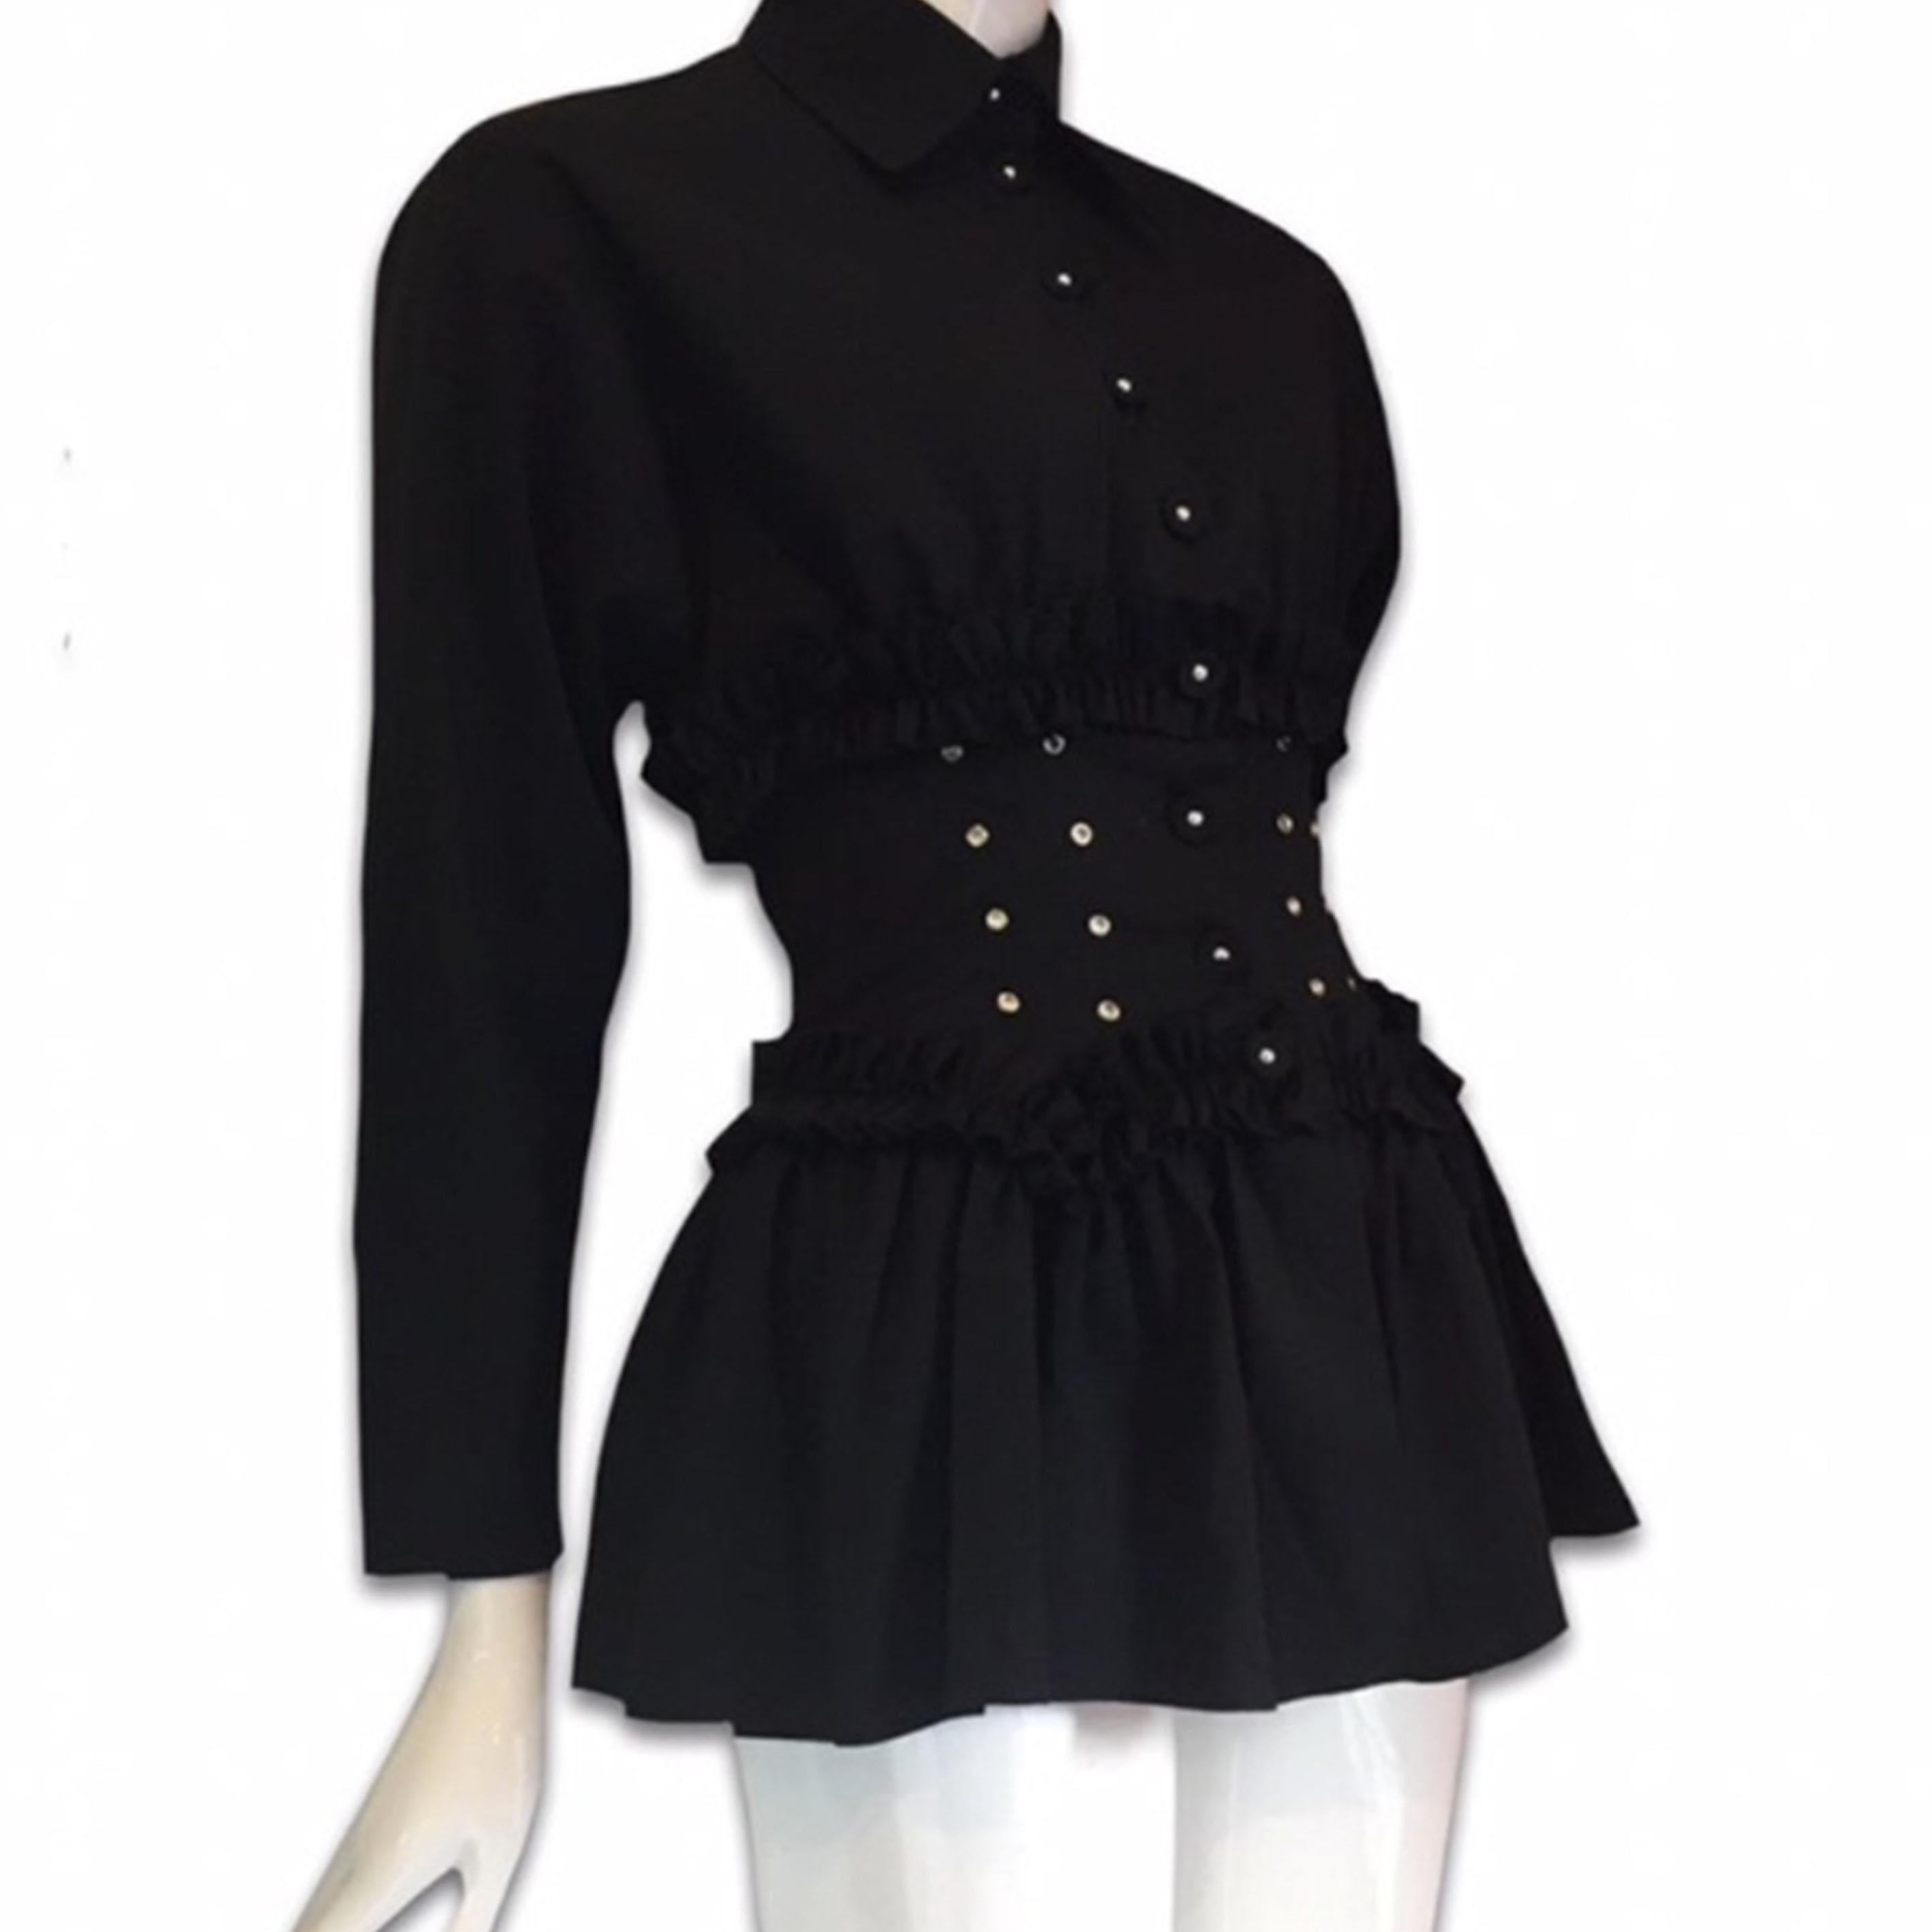 CHANTAL THOMASS FW1993 Black shirt with ruffles lace up corset

Tag: THOMASS

Size M

Shoulder: 47cm/ 18,50 inches

Length: 71cm/ 27,95 inches

Chest: 40cm/ 15,74 inches

Sleeve: 51cm/ 20,07 inches

Cotton

Perfect condition

Shipping worldwide with